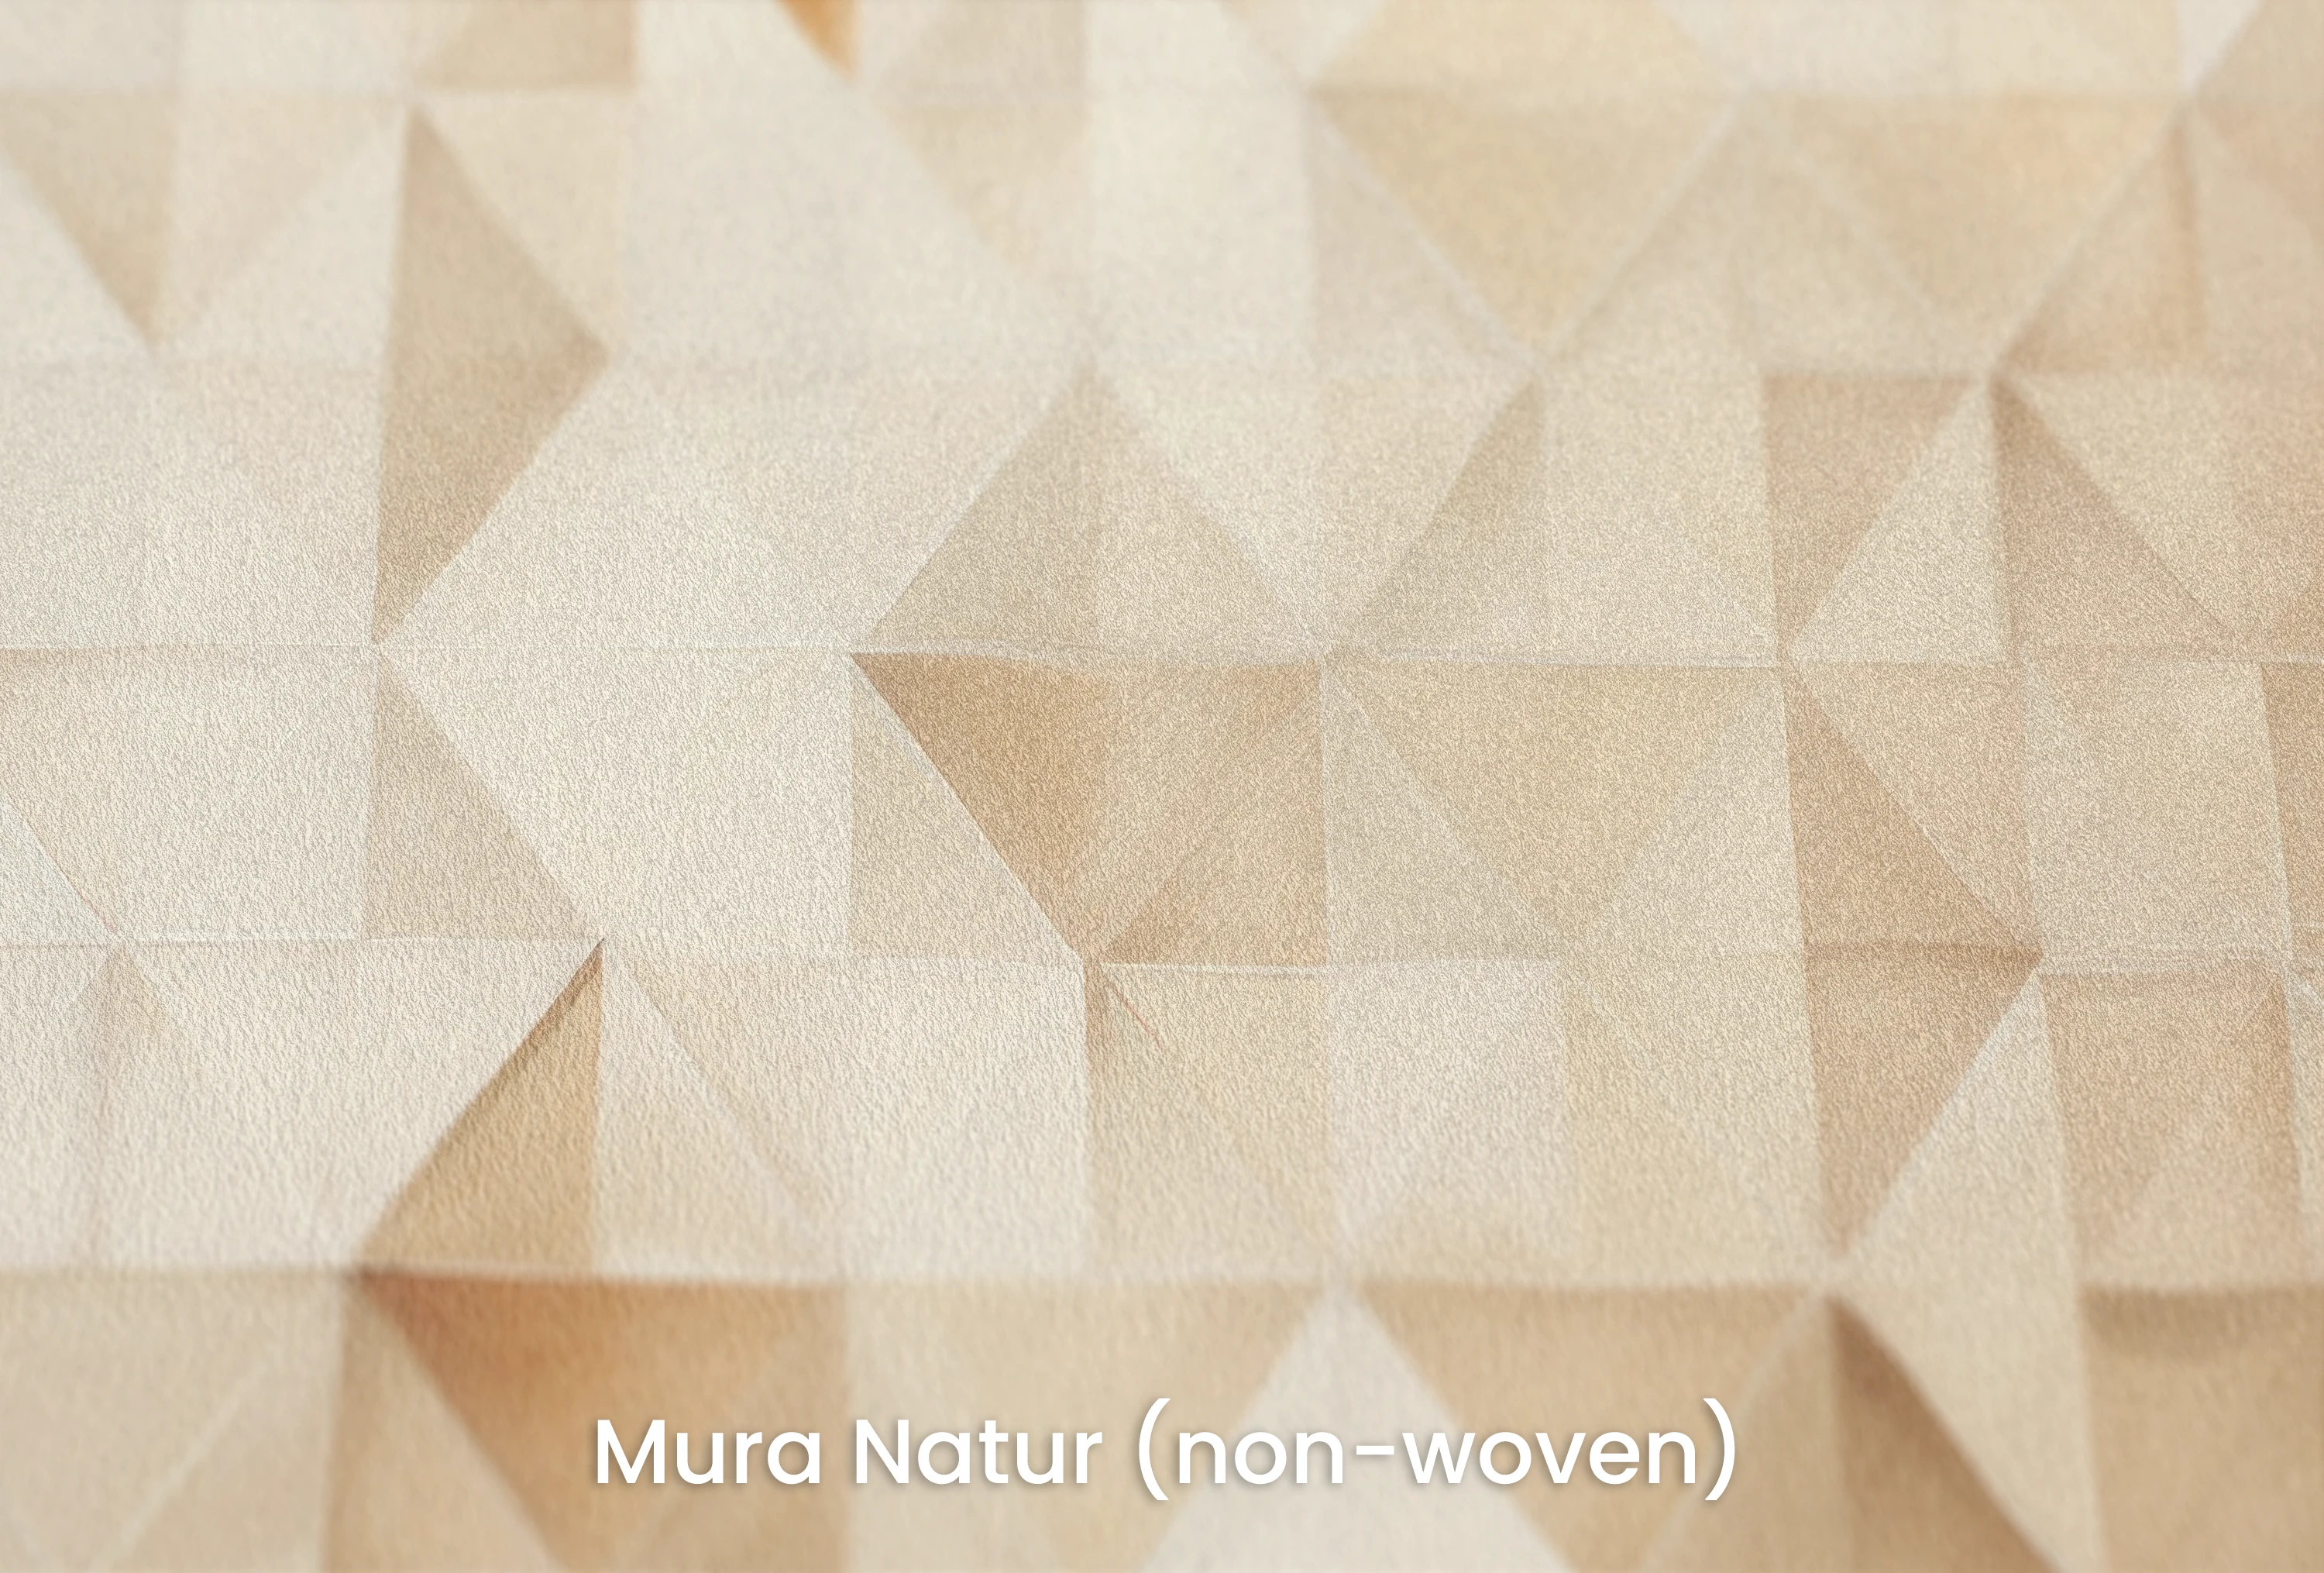 Mura Natur (non-woven) - Natural and ecological non-woven wallpaper with a delicate texture - perfectly matte - perfectly scattering even focused light